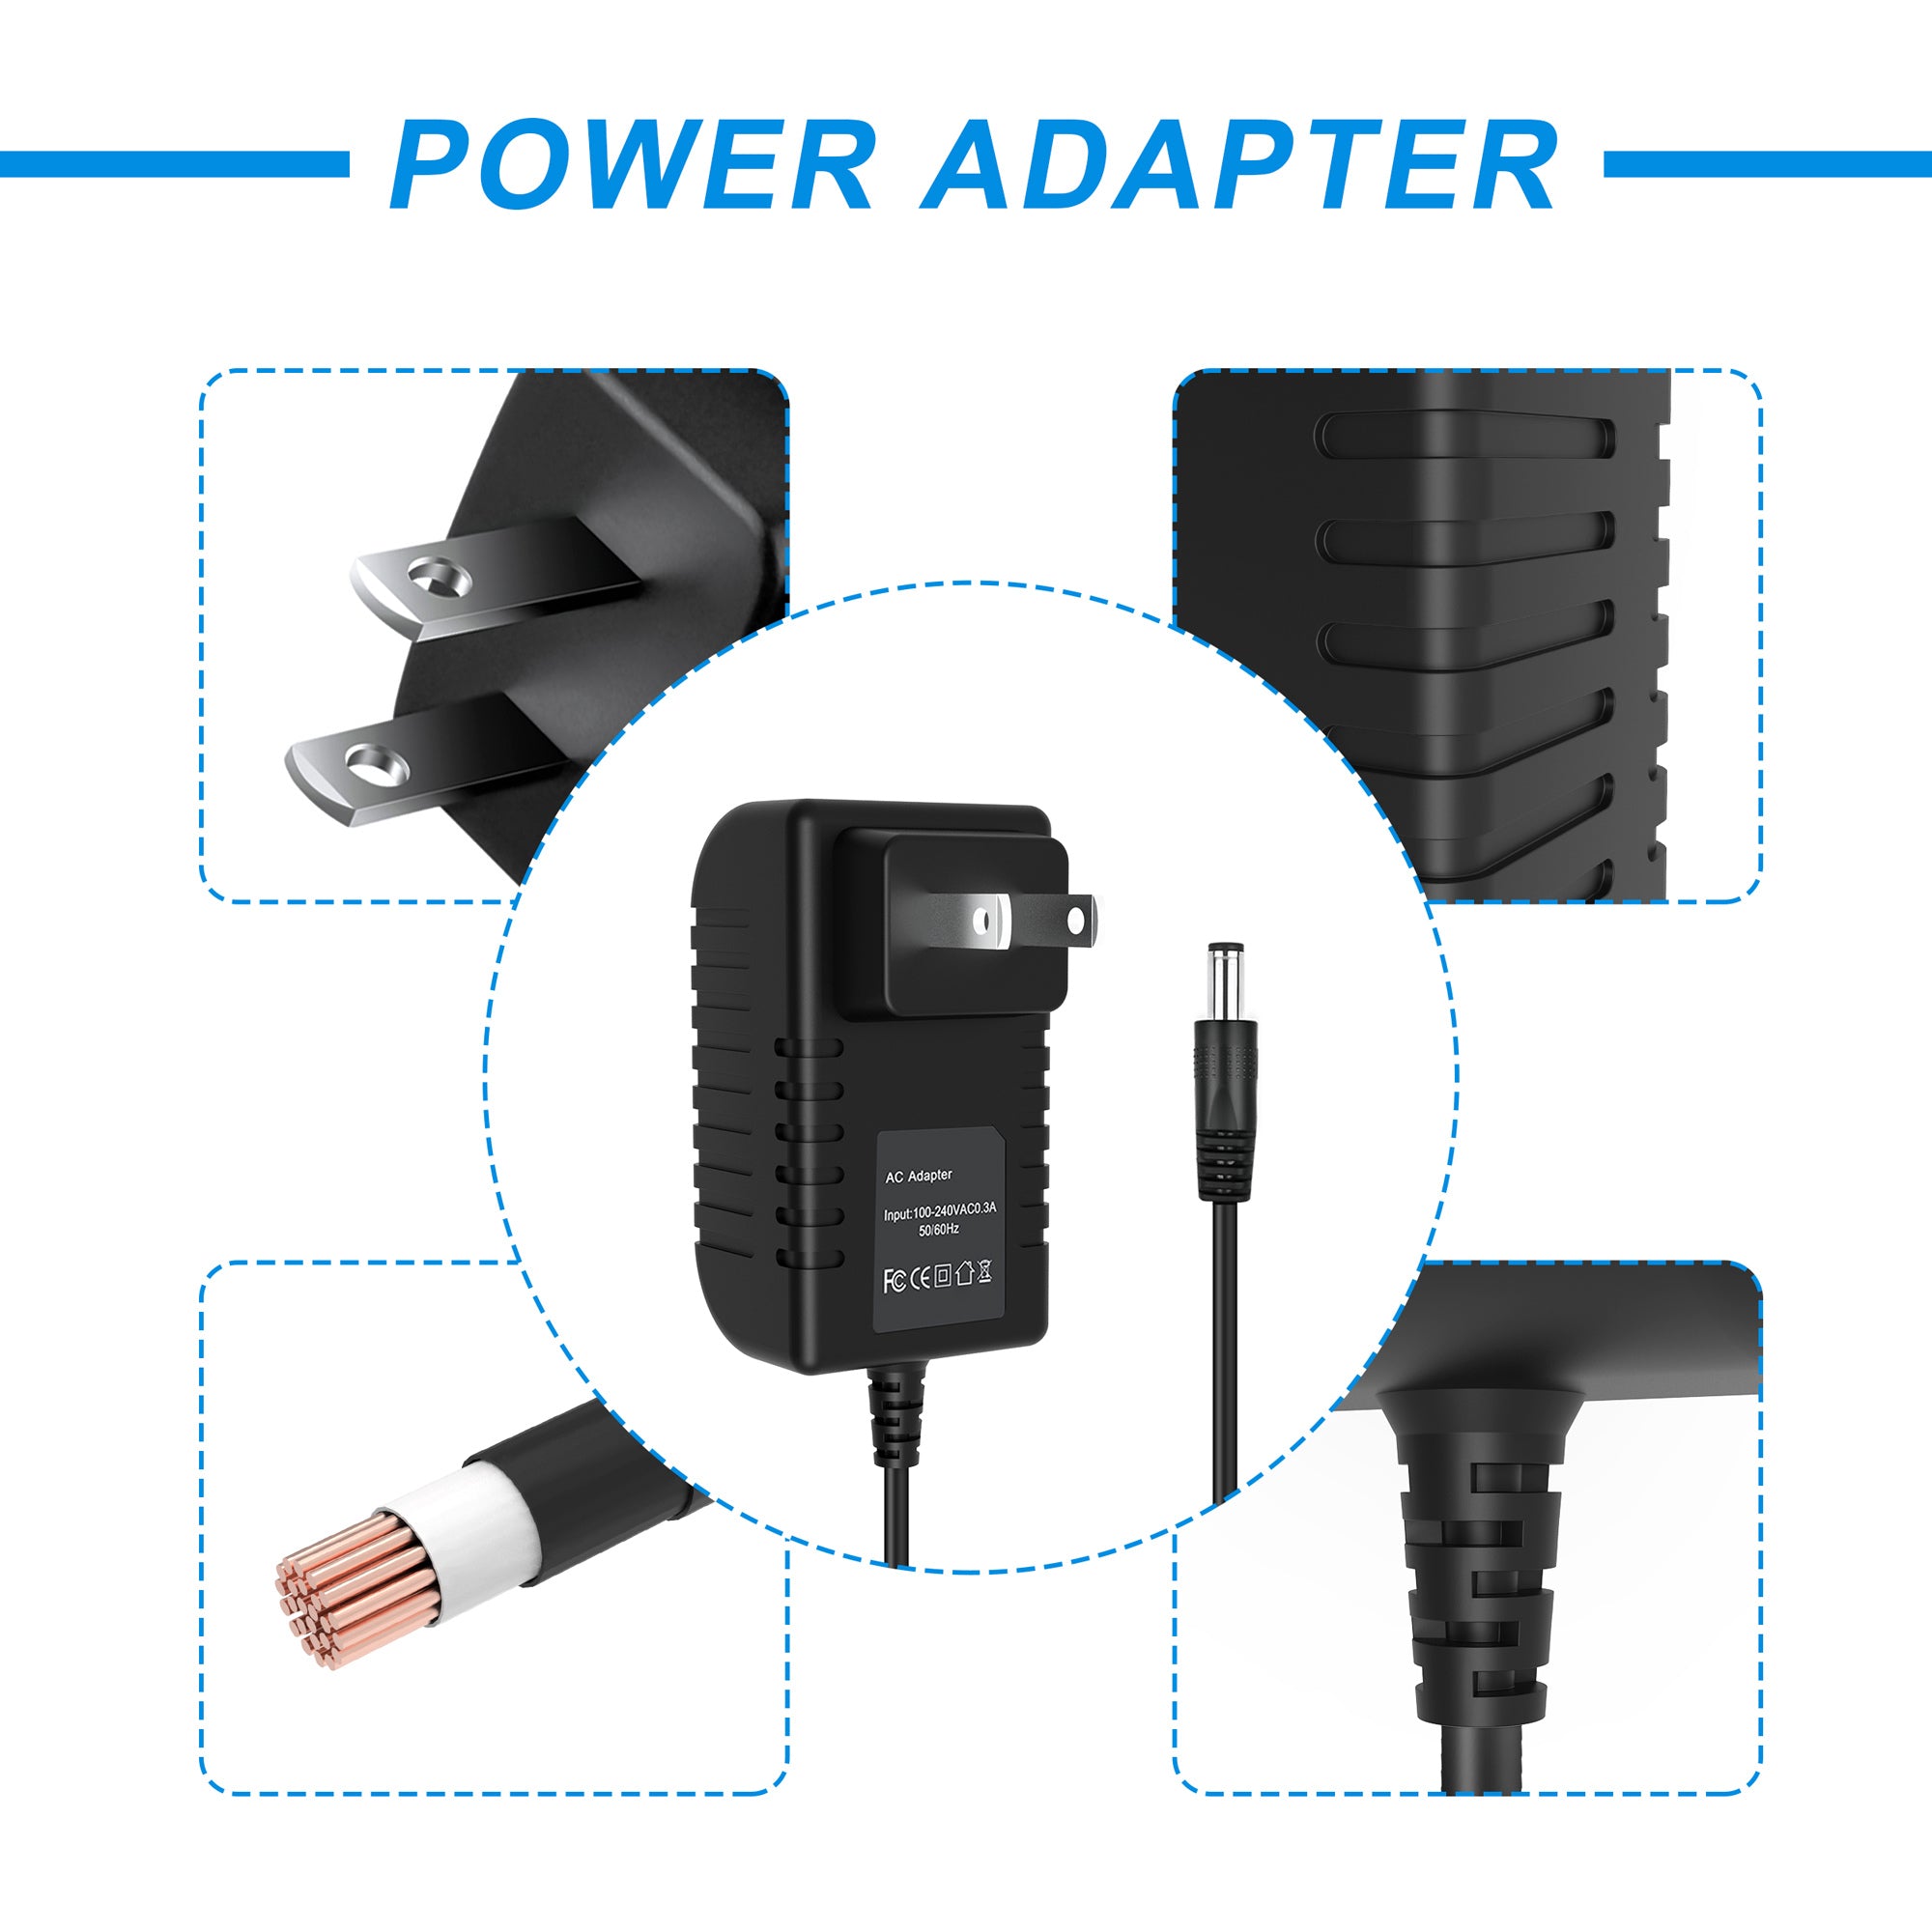 AbleGrid 12V AC/DC Adapter Compatible with CASIO AD-A12150LW ADA12150LW 12VDC Power Supply Cord Cable Charger Input: 100V - 120V AC - 240 VAC 50/60Hz Worldwide Voltage Use Mains PSU